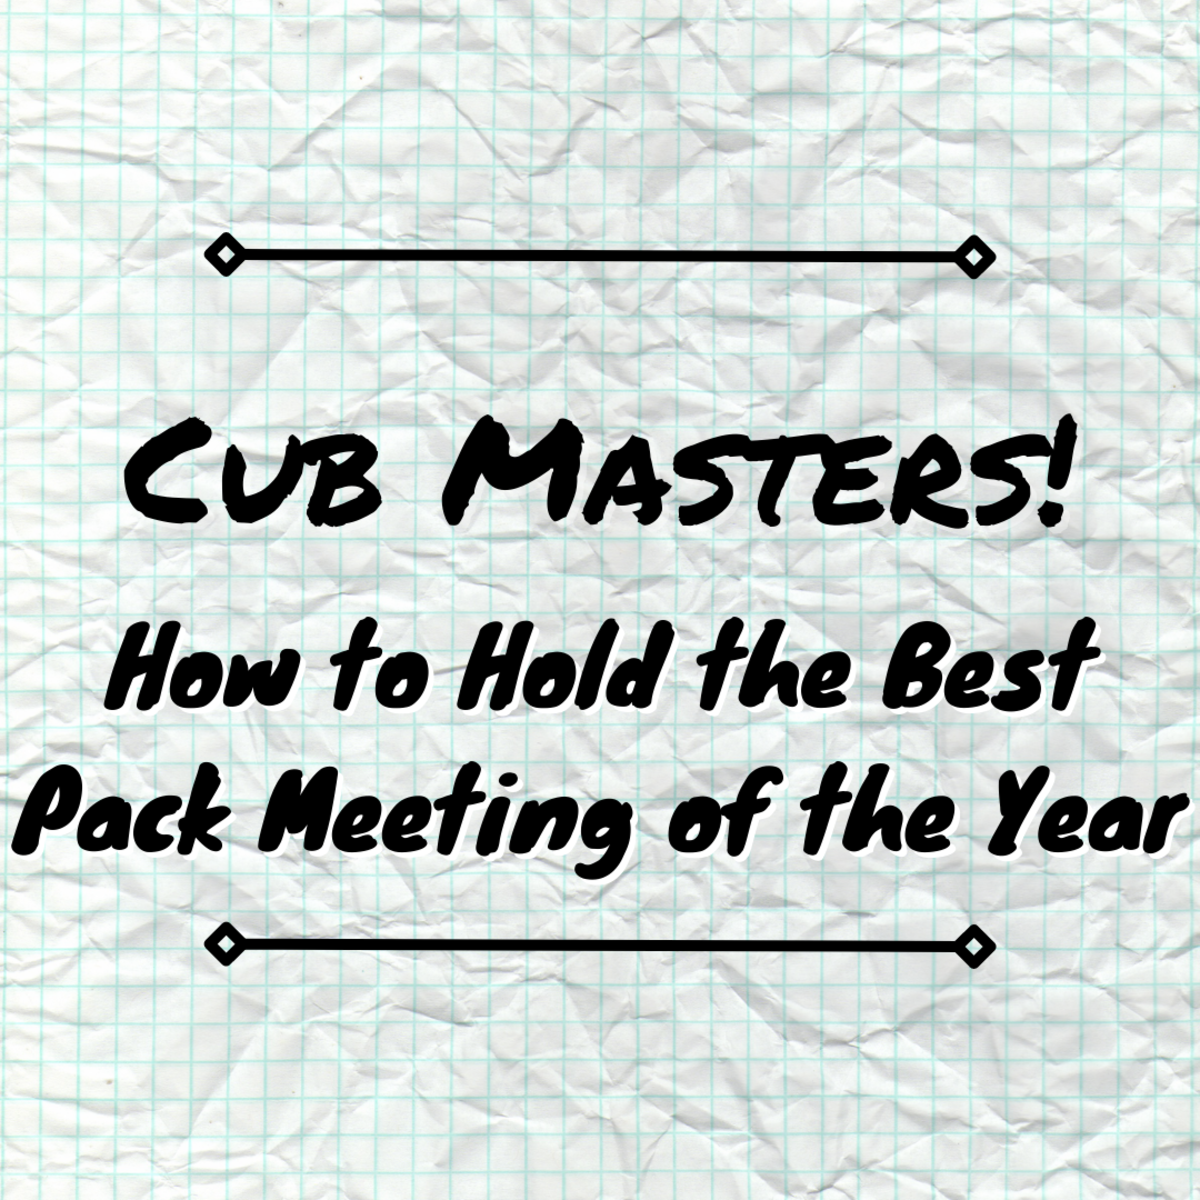 Read on to learn how to easily hold the greatest cub pack meeting of the year! Become a legendary Cub Master!